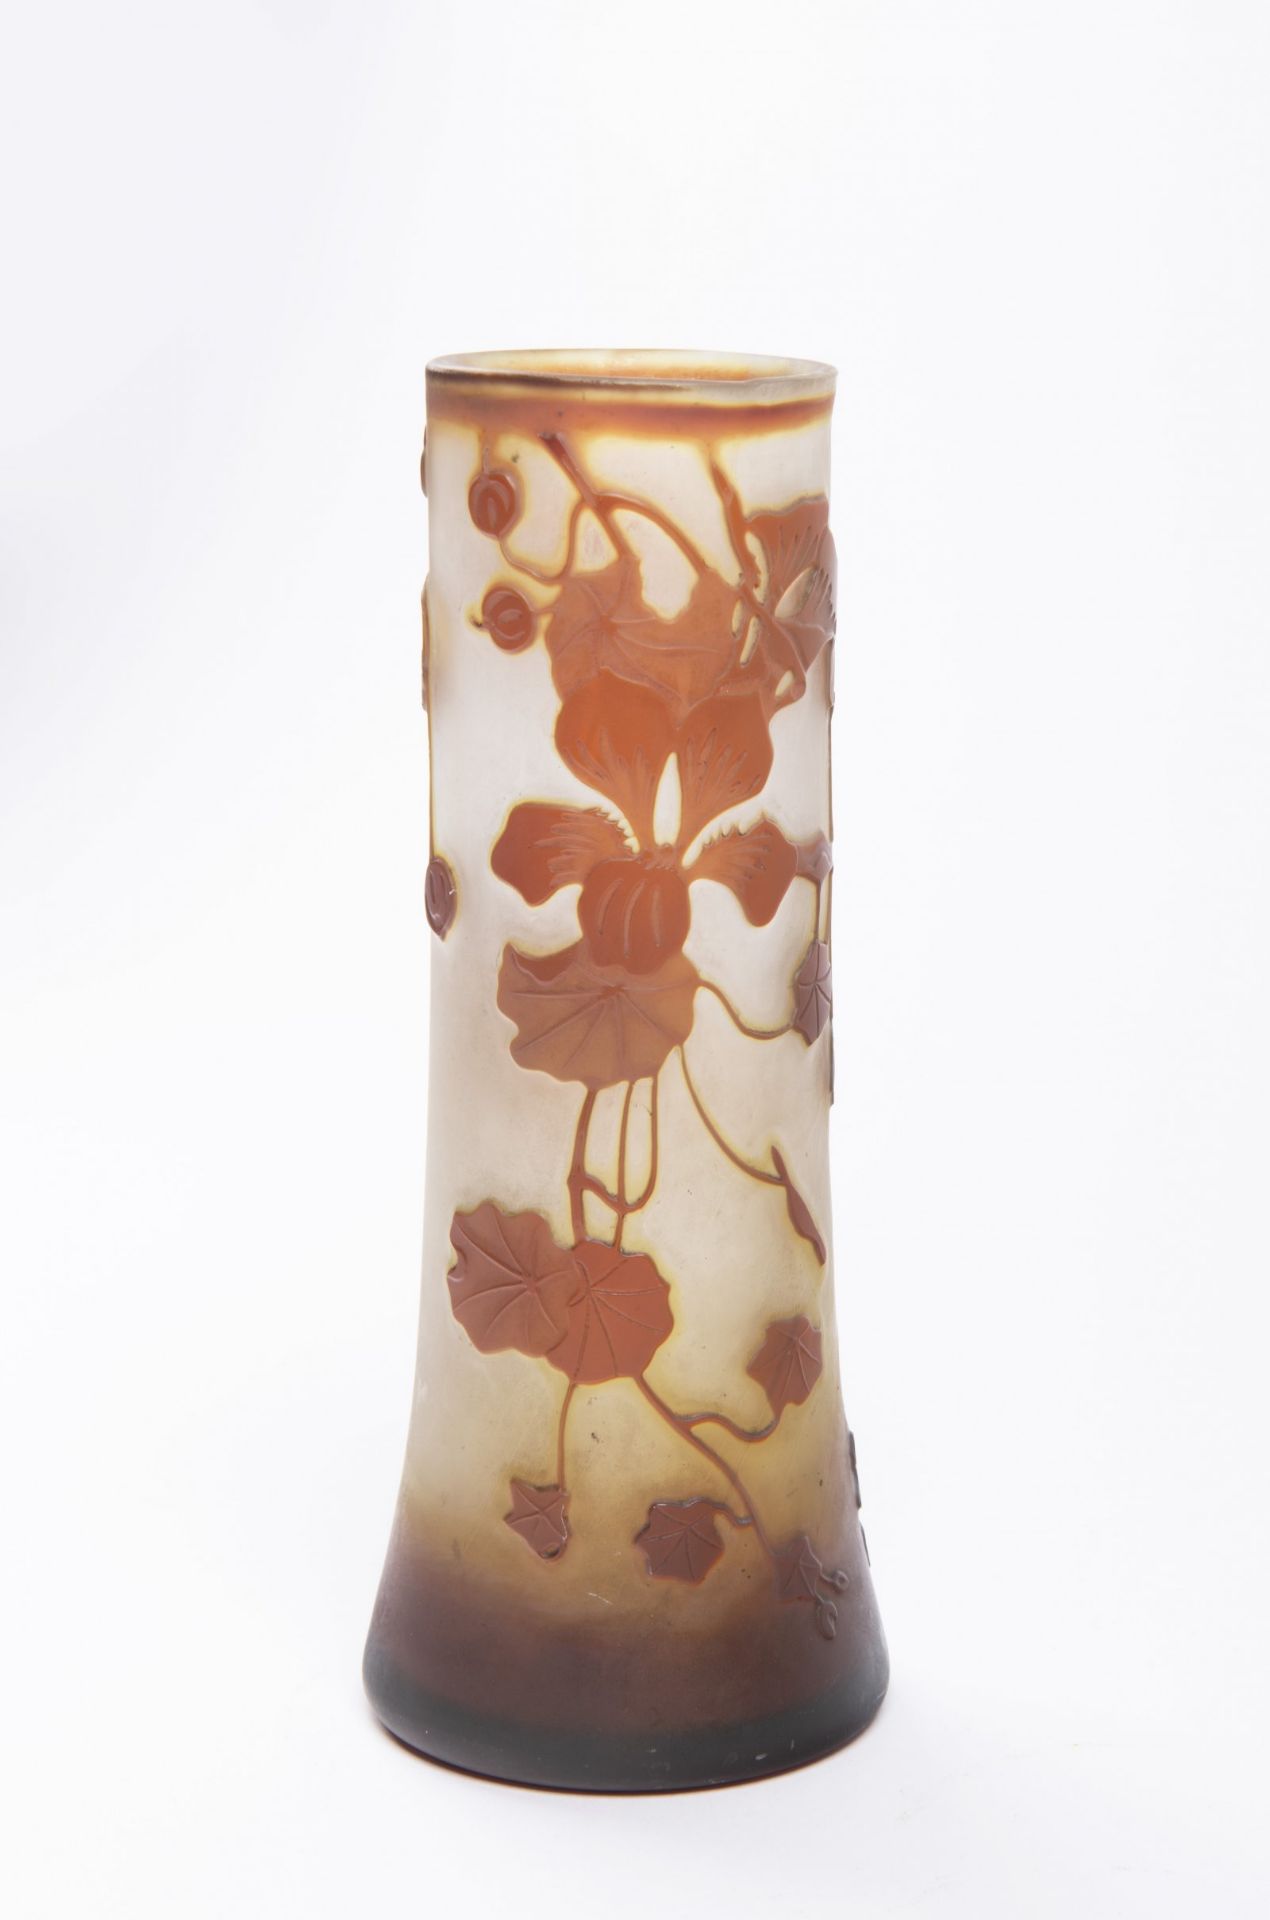 MOSER VASE Ca. 1910 Bohemia Glass cameo 16,5 cm Signed: In lower half "Moser" Moser vase in the